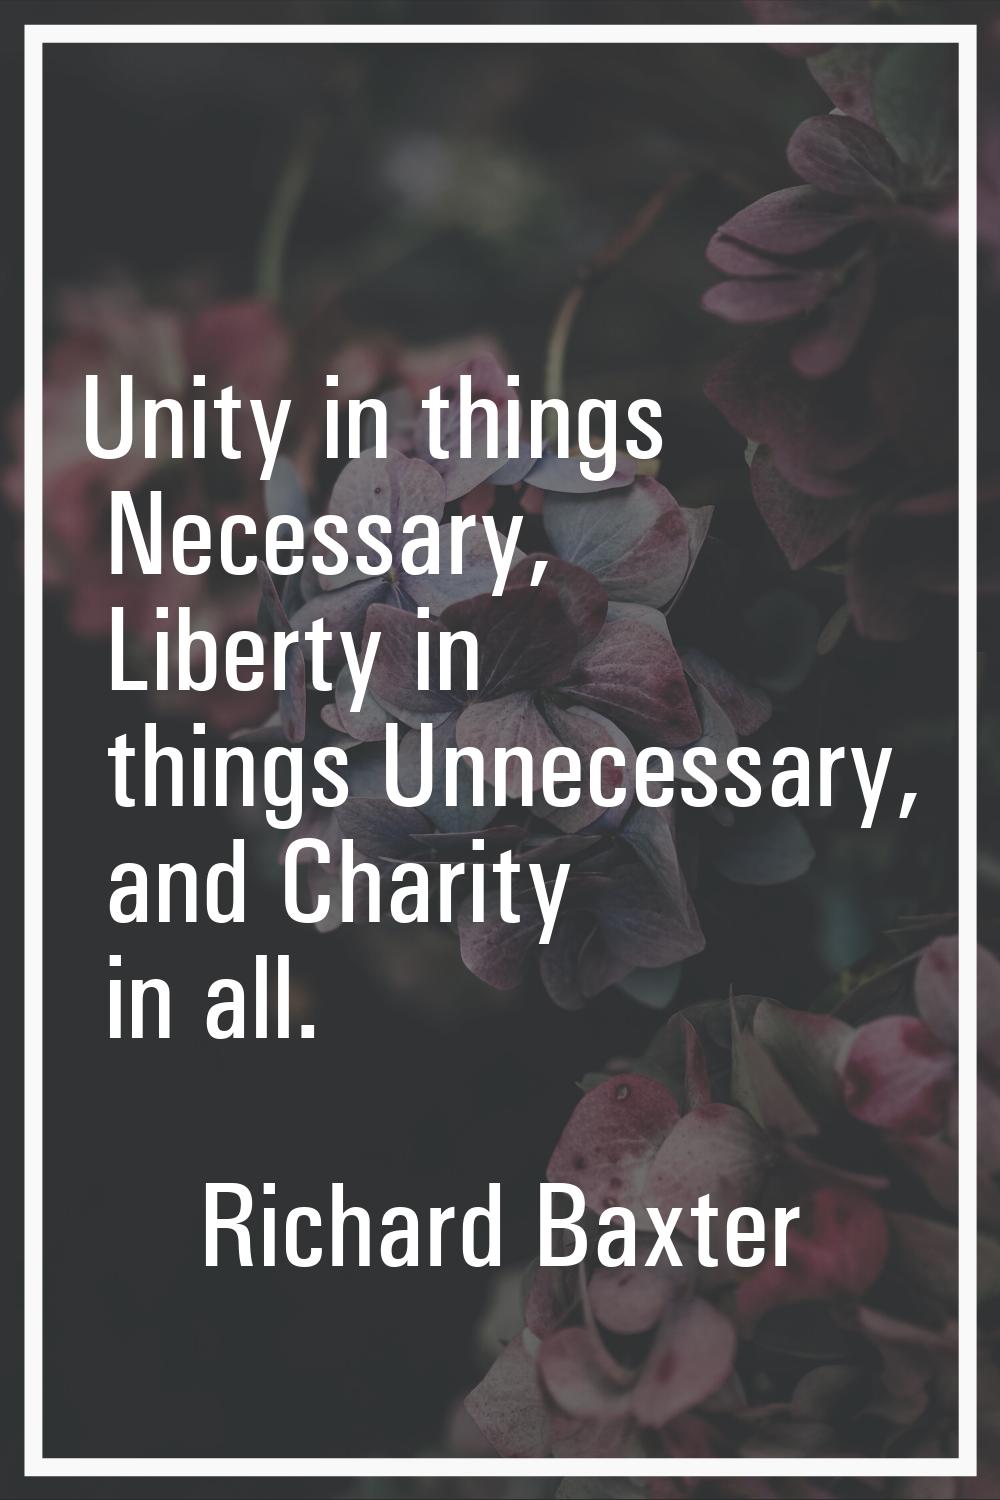 Unity in things Necessary, Liberty in things Unnecessary, and Charity in all.